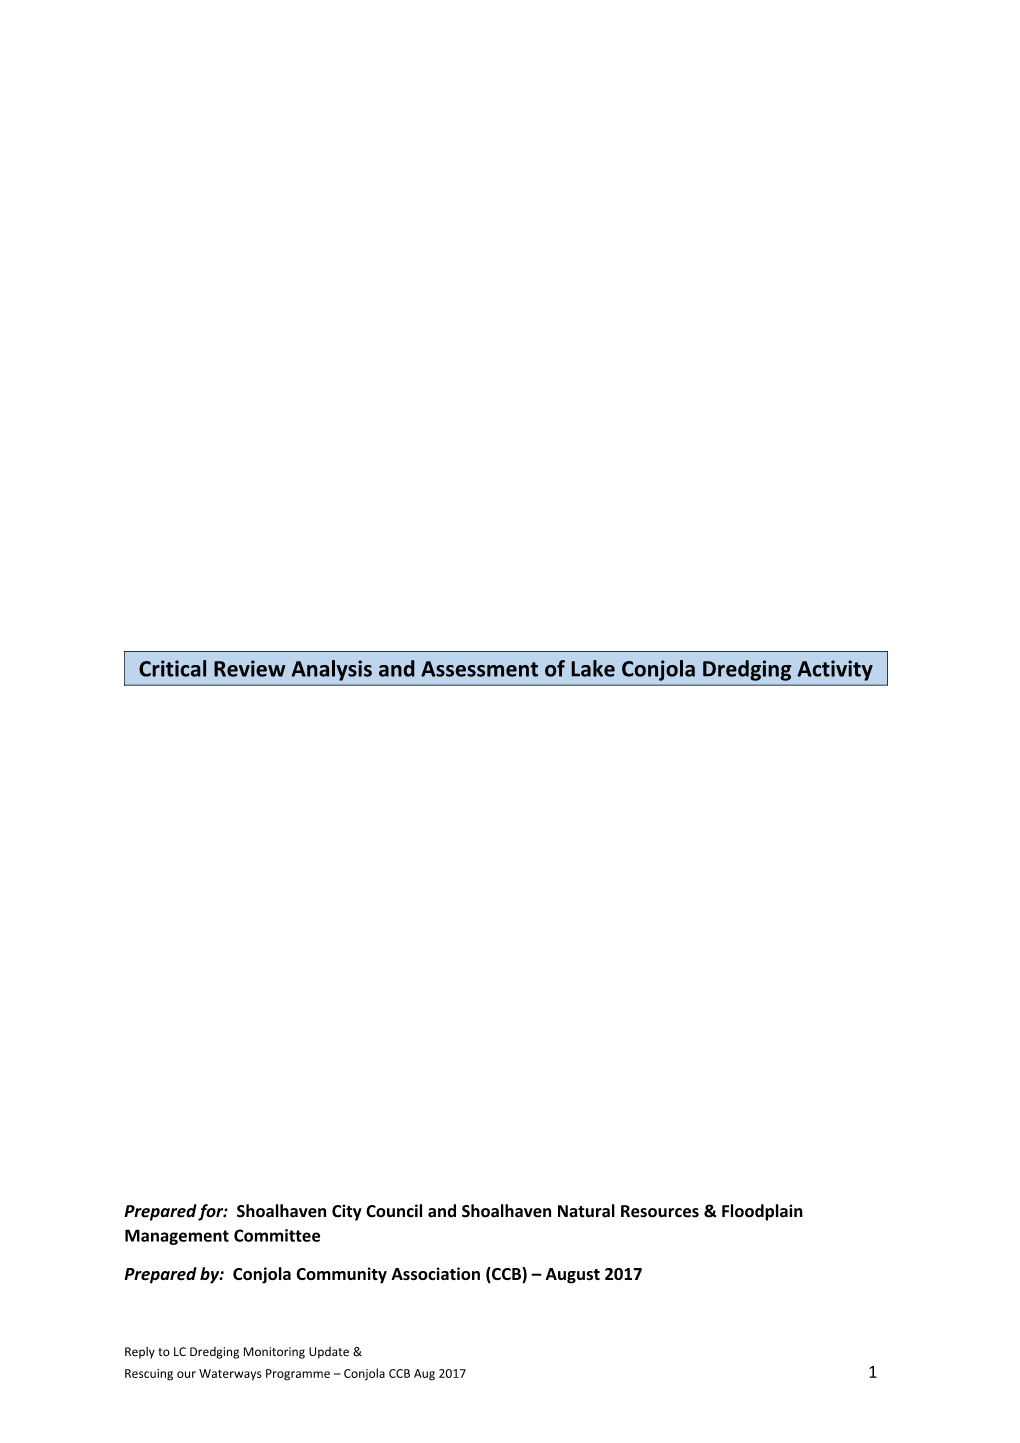 Critical Review Analysis and Assessment of Lake Conjola Dredging Activity